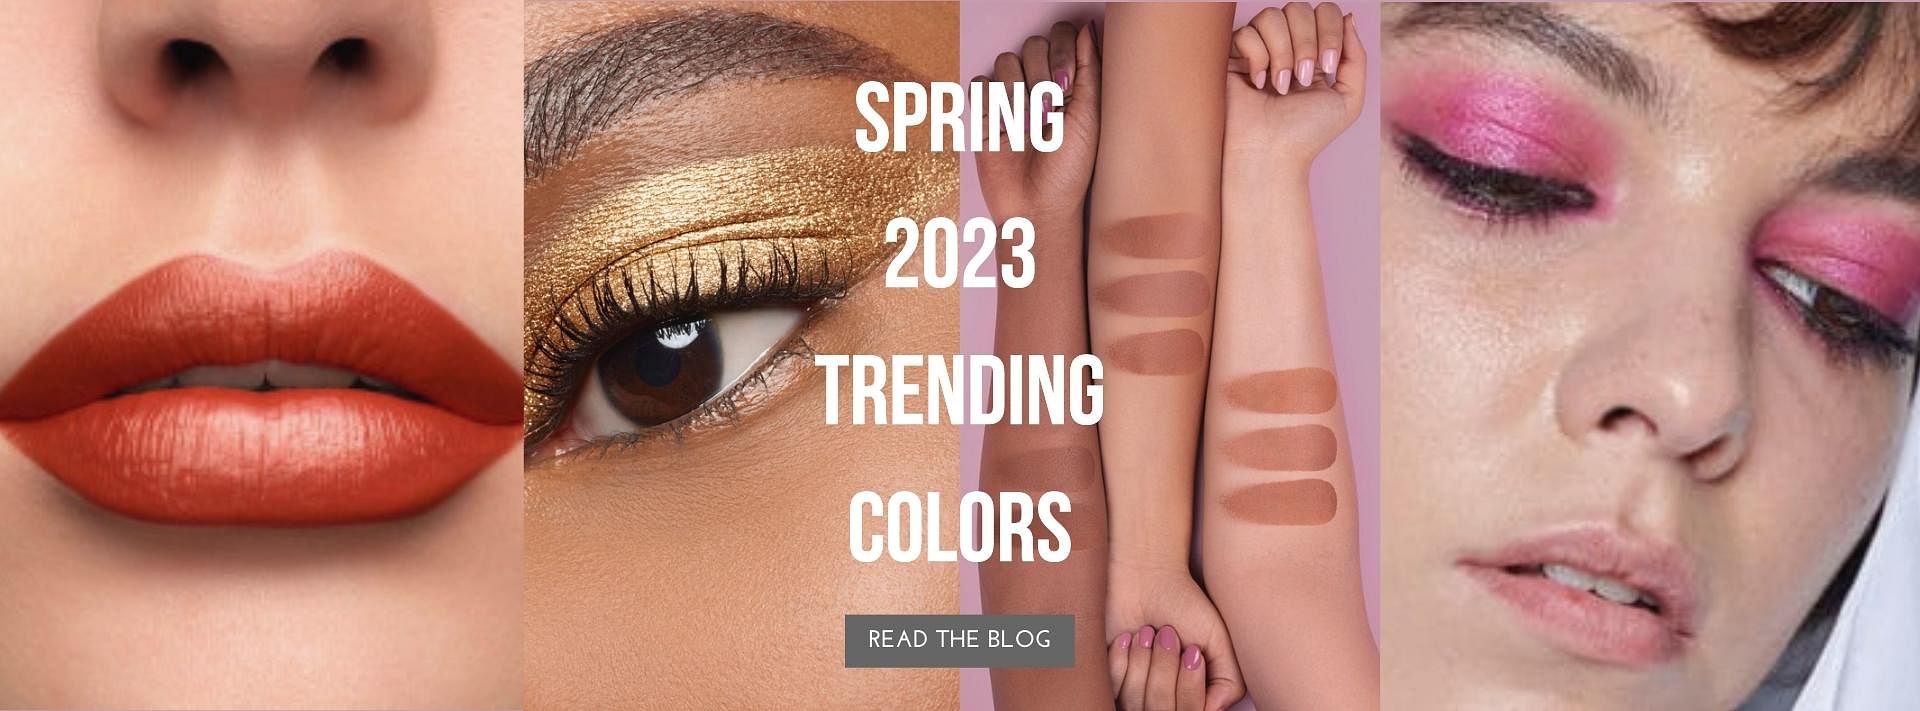 Spring 2023 trending colors